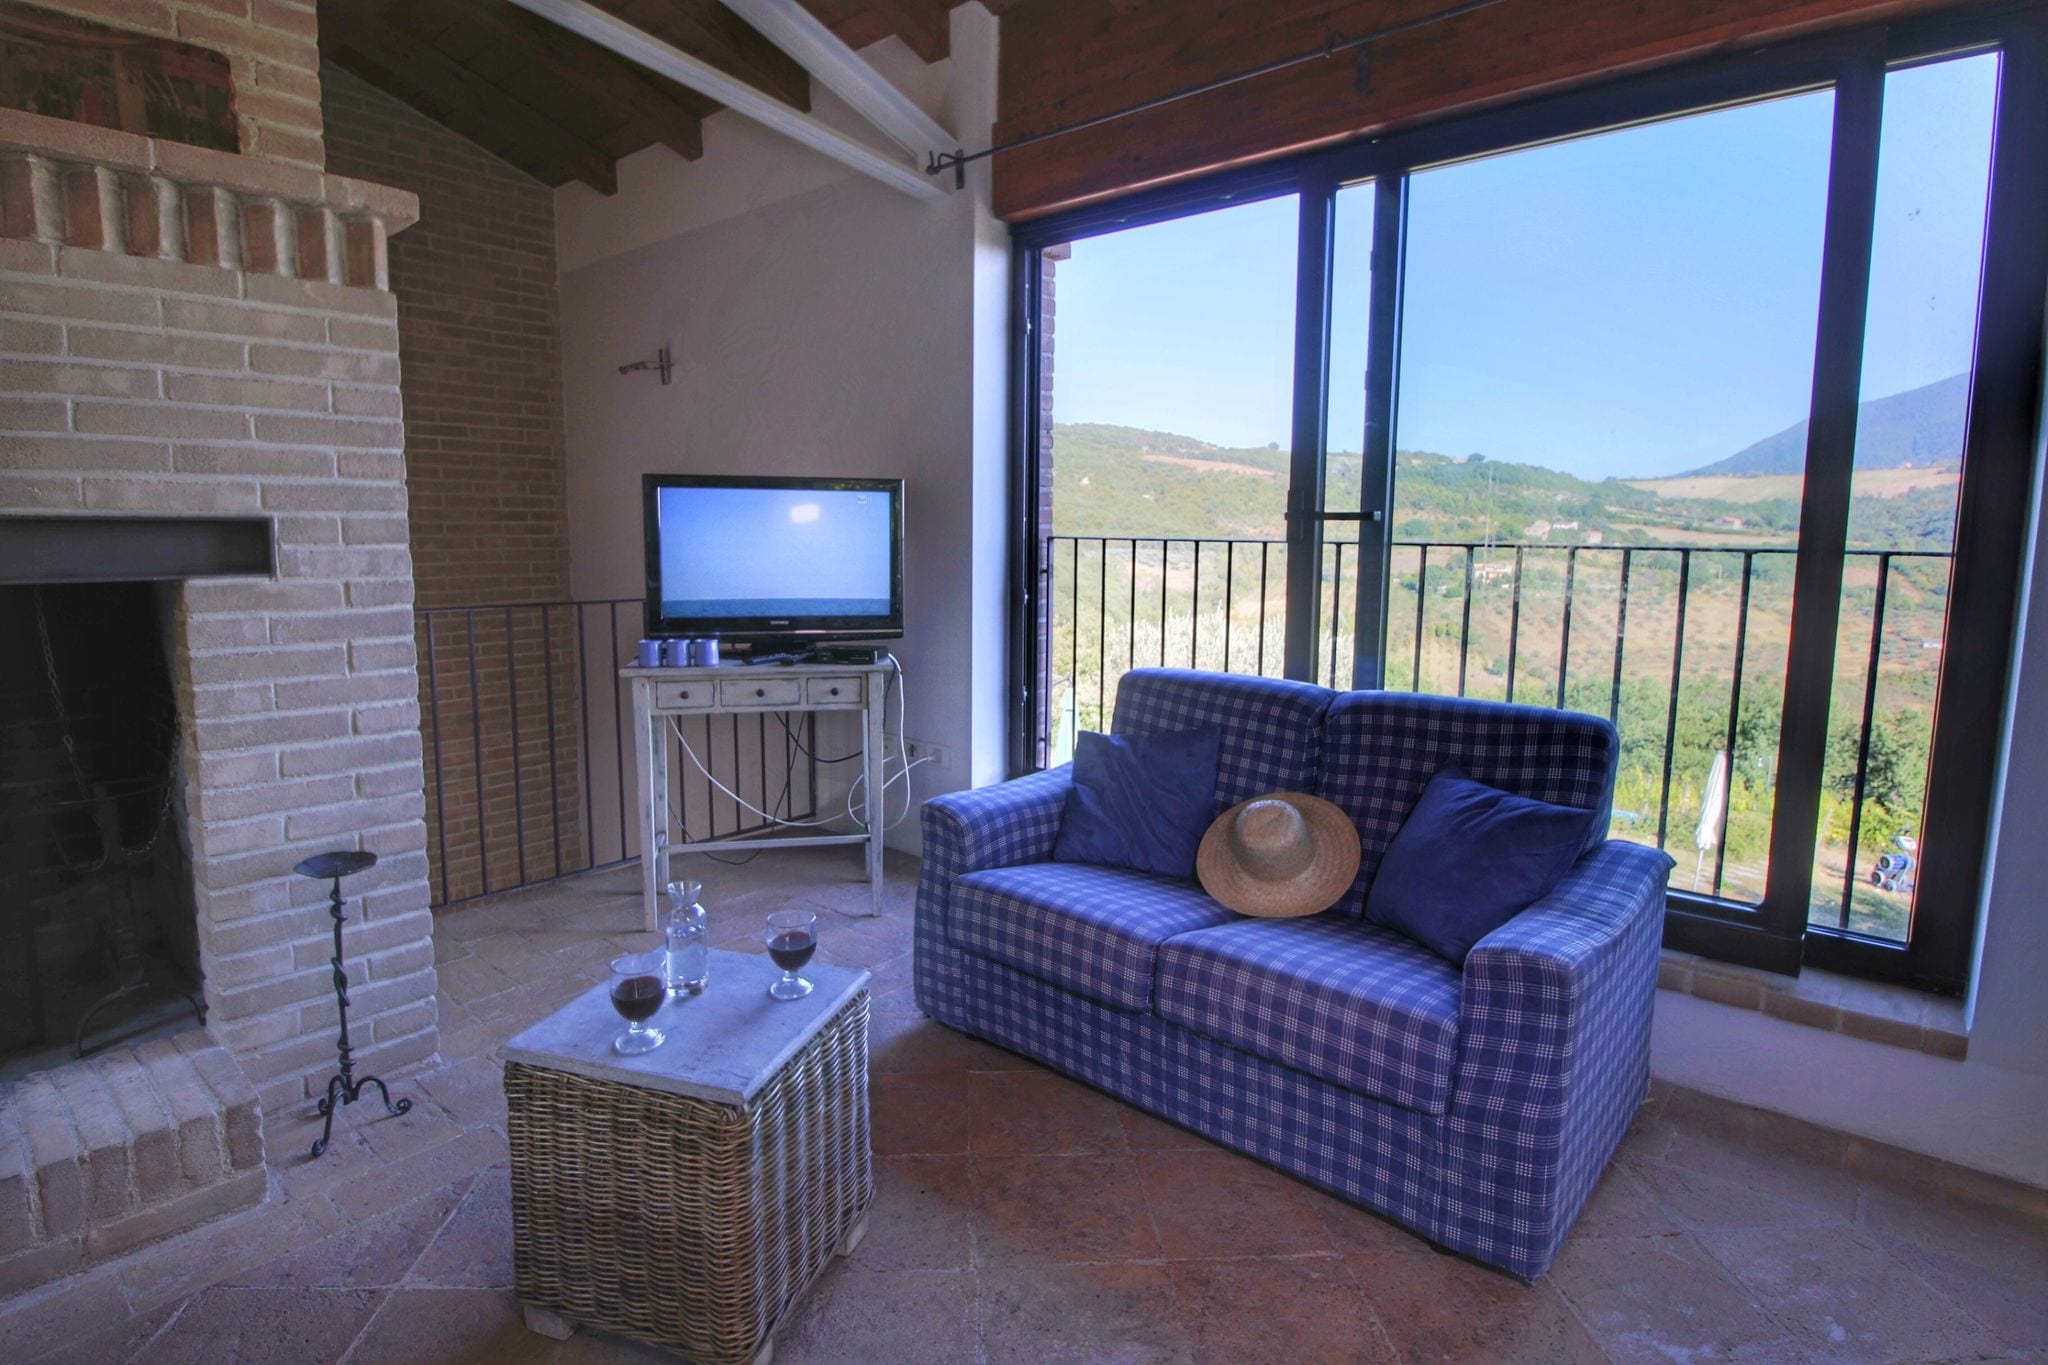 Attractive Holiday Home in Assisi with Swimming Pool